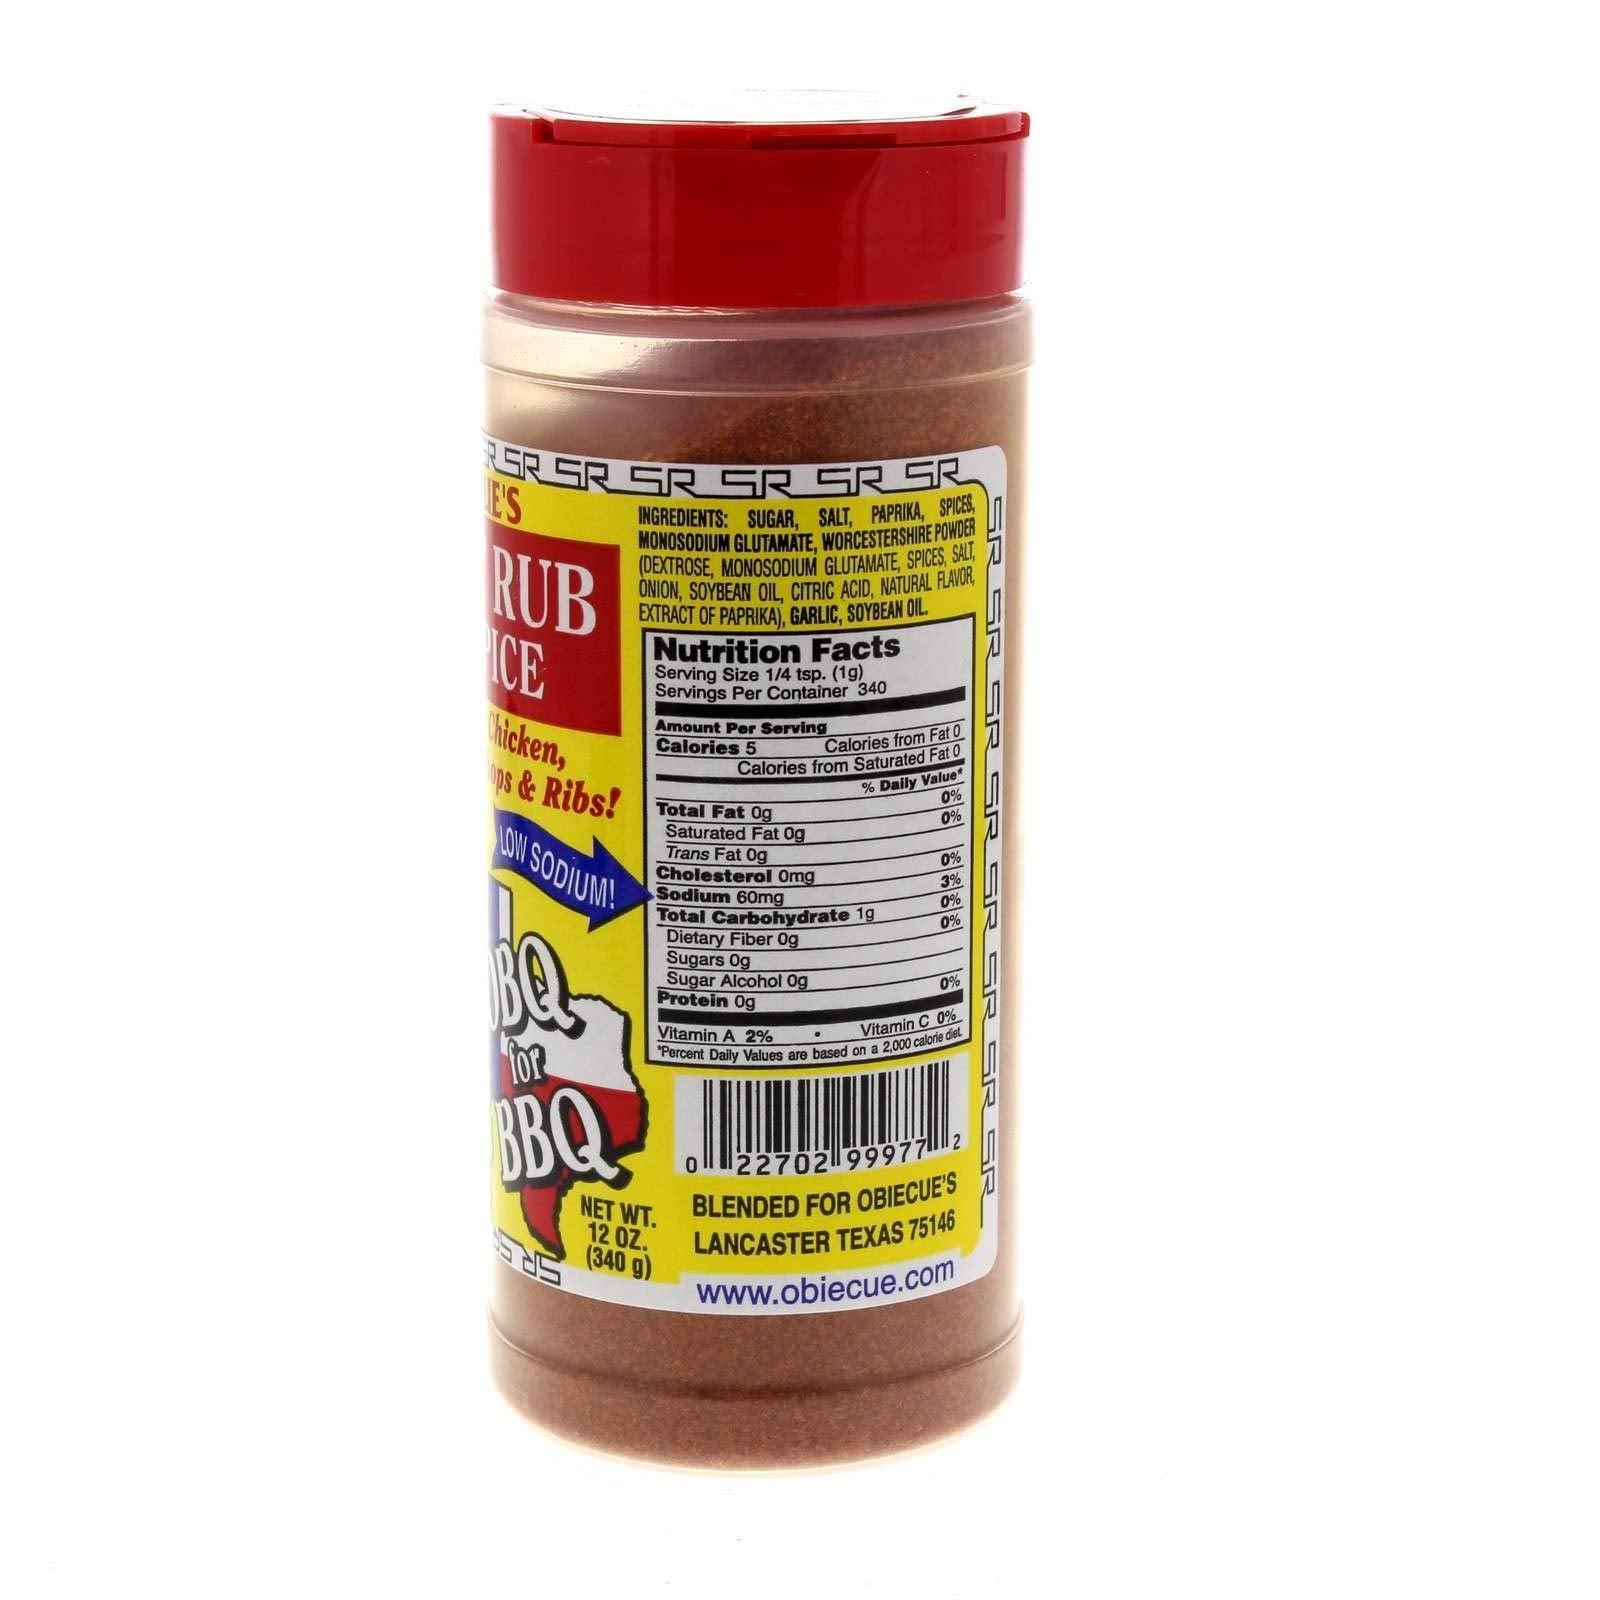 Back view of Obie-Cue's Sweet Rub BBQ Spice bottle. The label provides nutritional information and ingredients such as sugar, salt, paprika, and spices. It also includes monosodium glutamate and Worcestershire powder, and highlights its low sodium content.